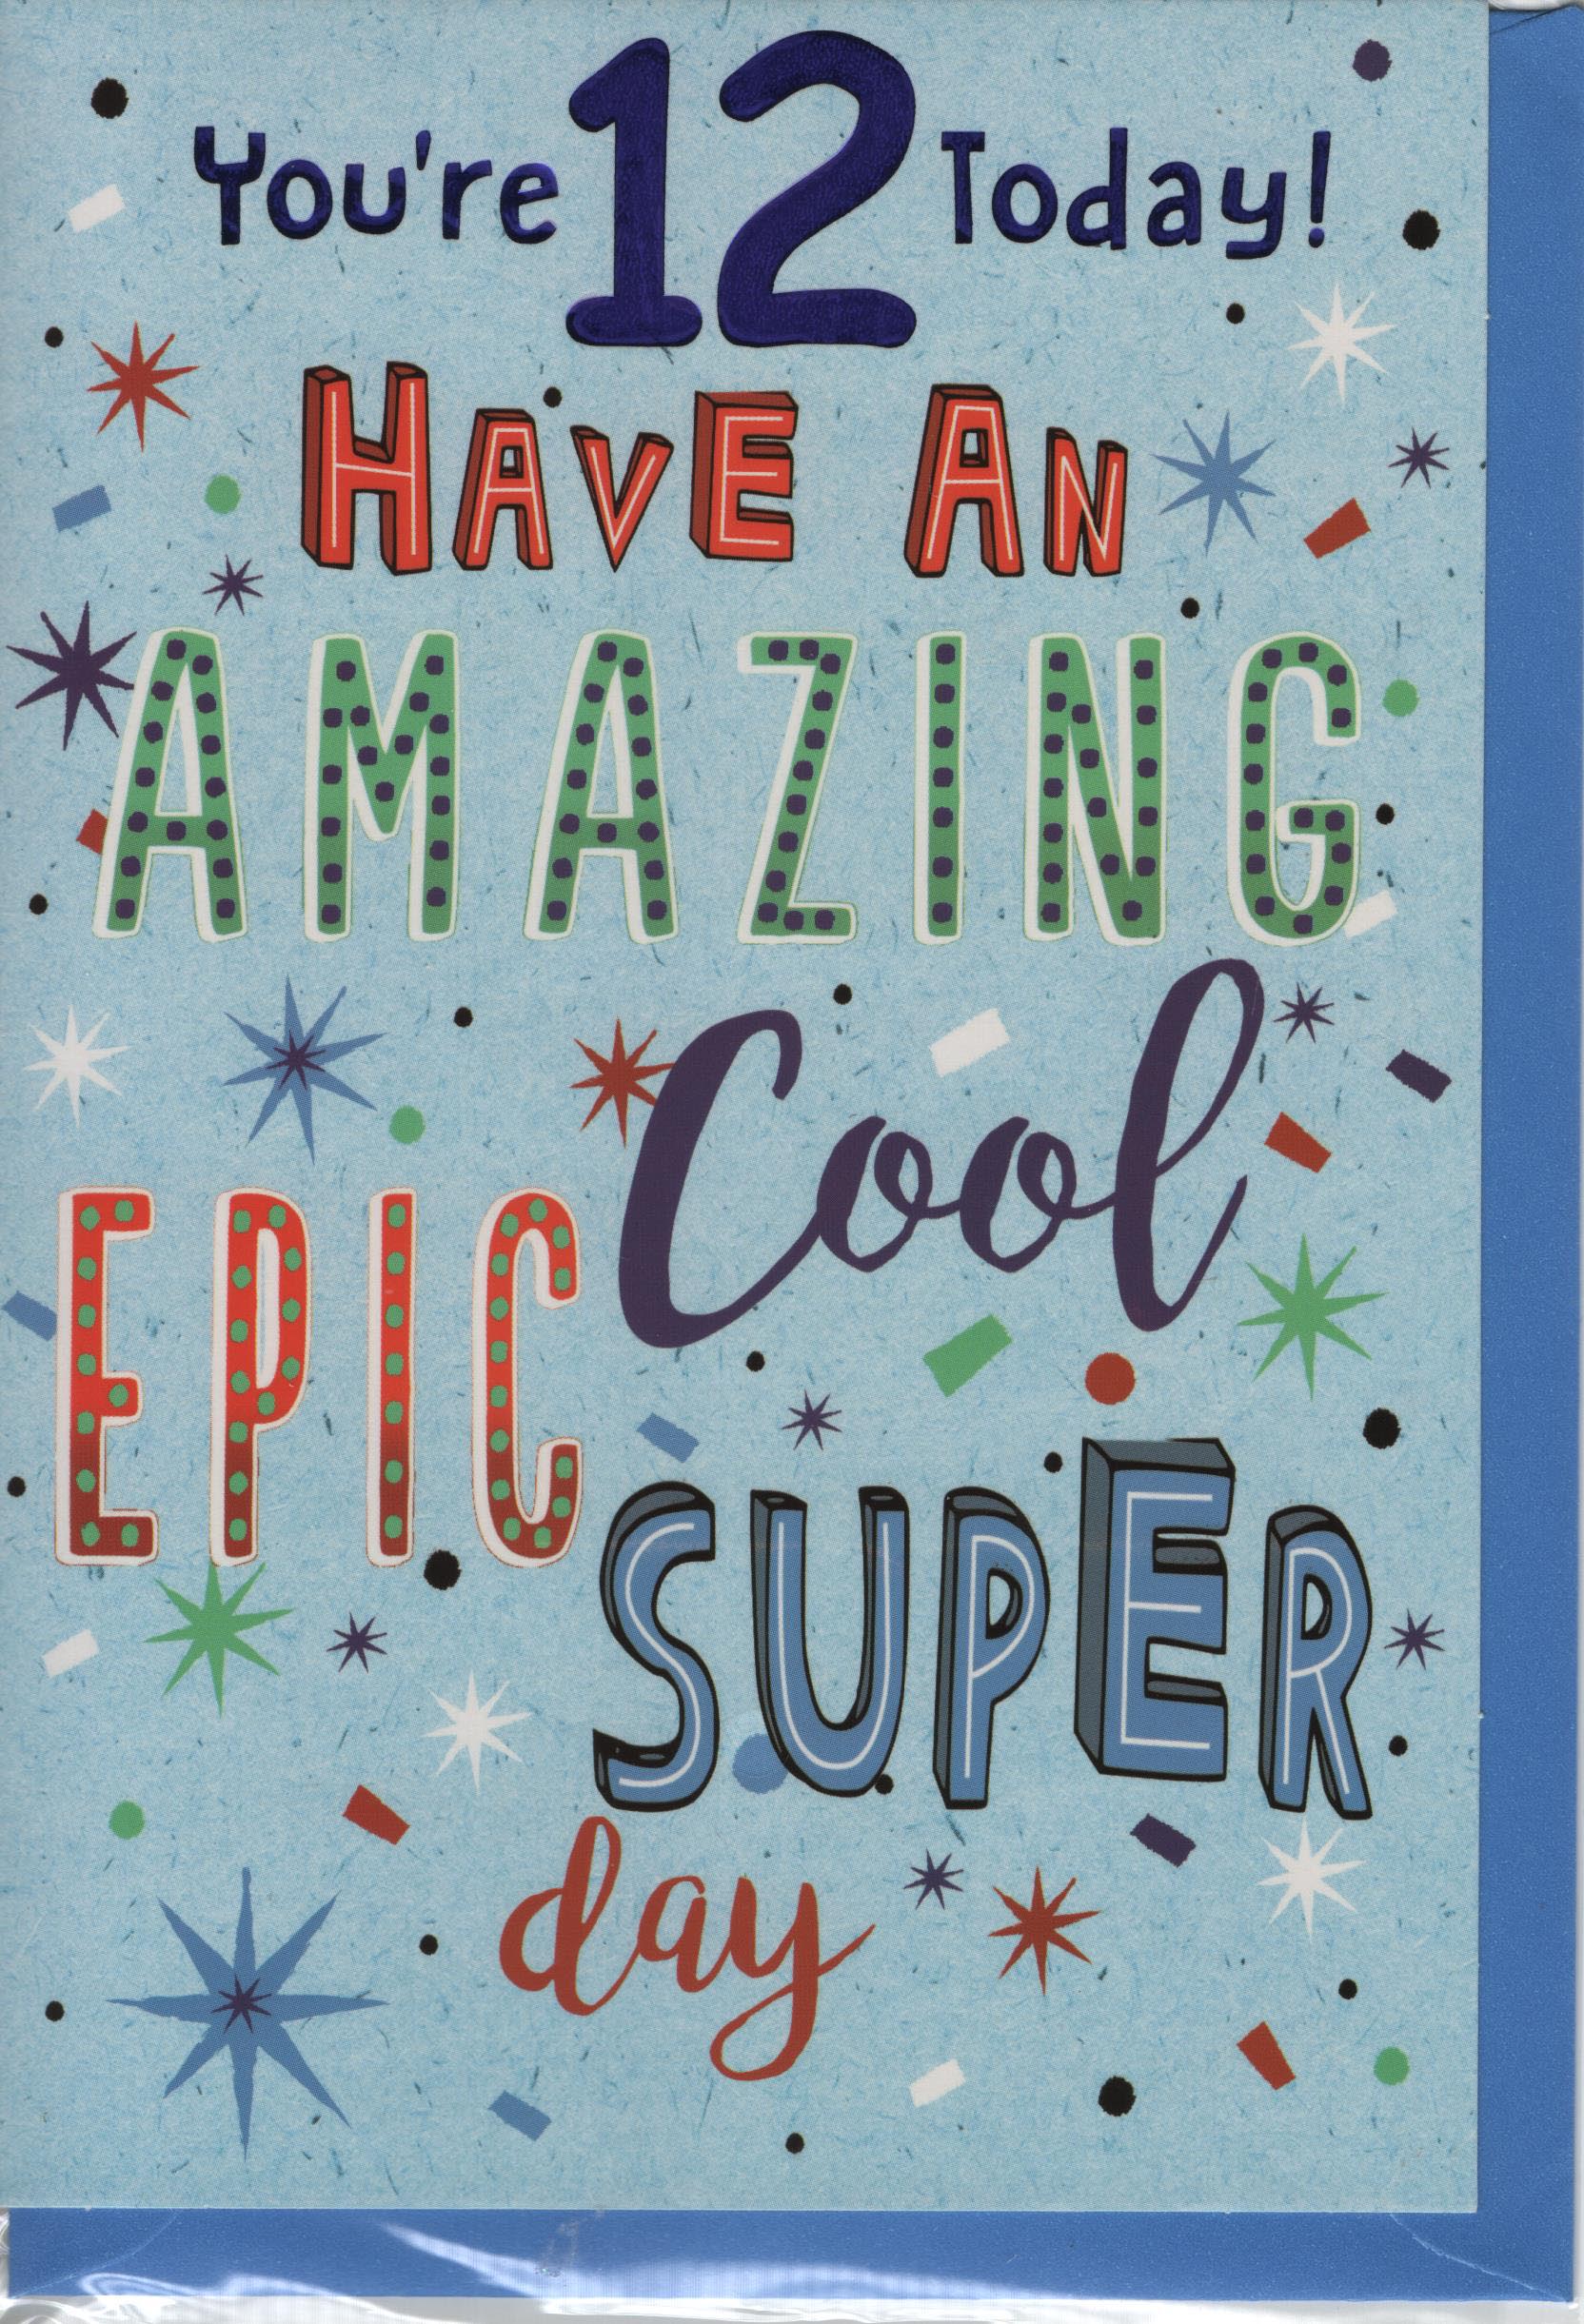 You're 12 Today! Have an Amazing Cool Epic Super Day